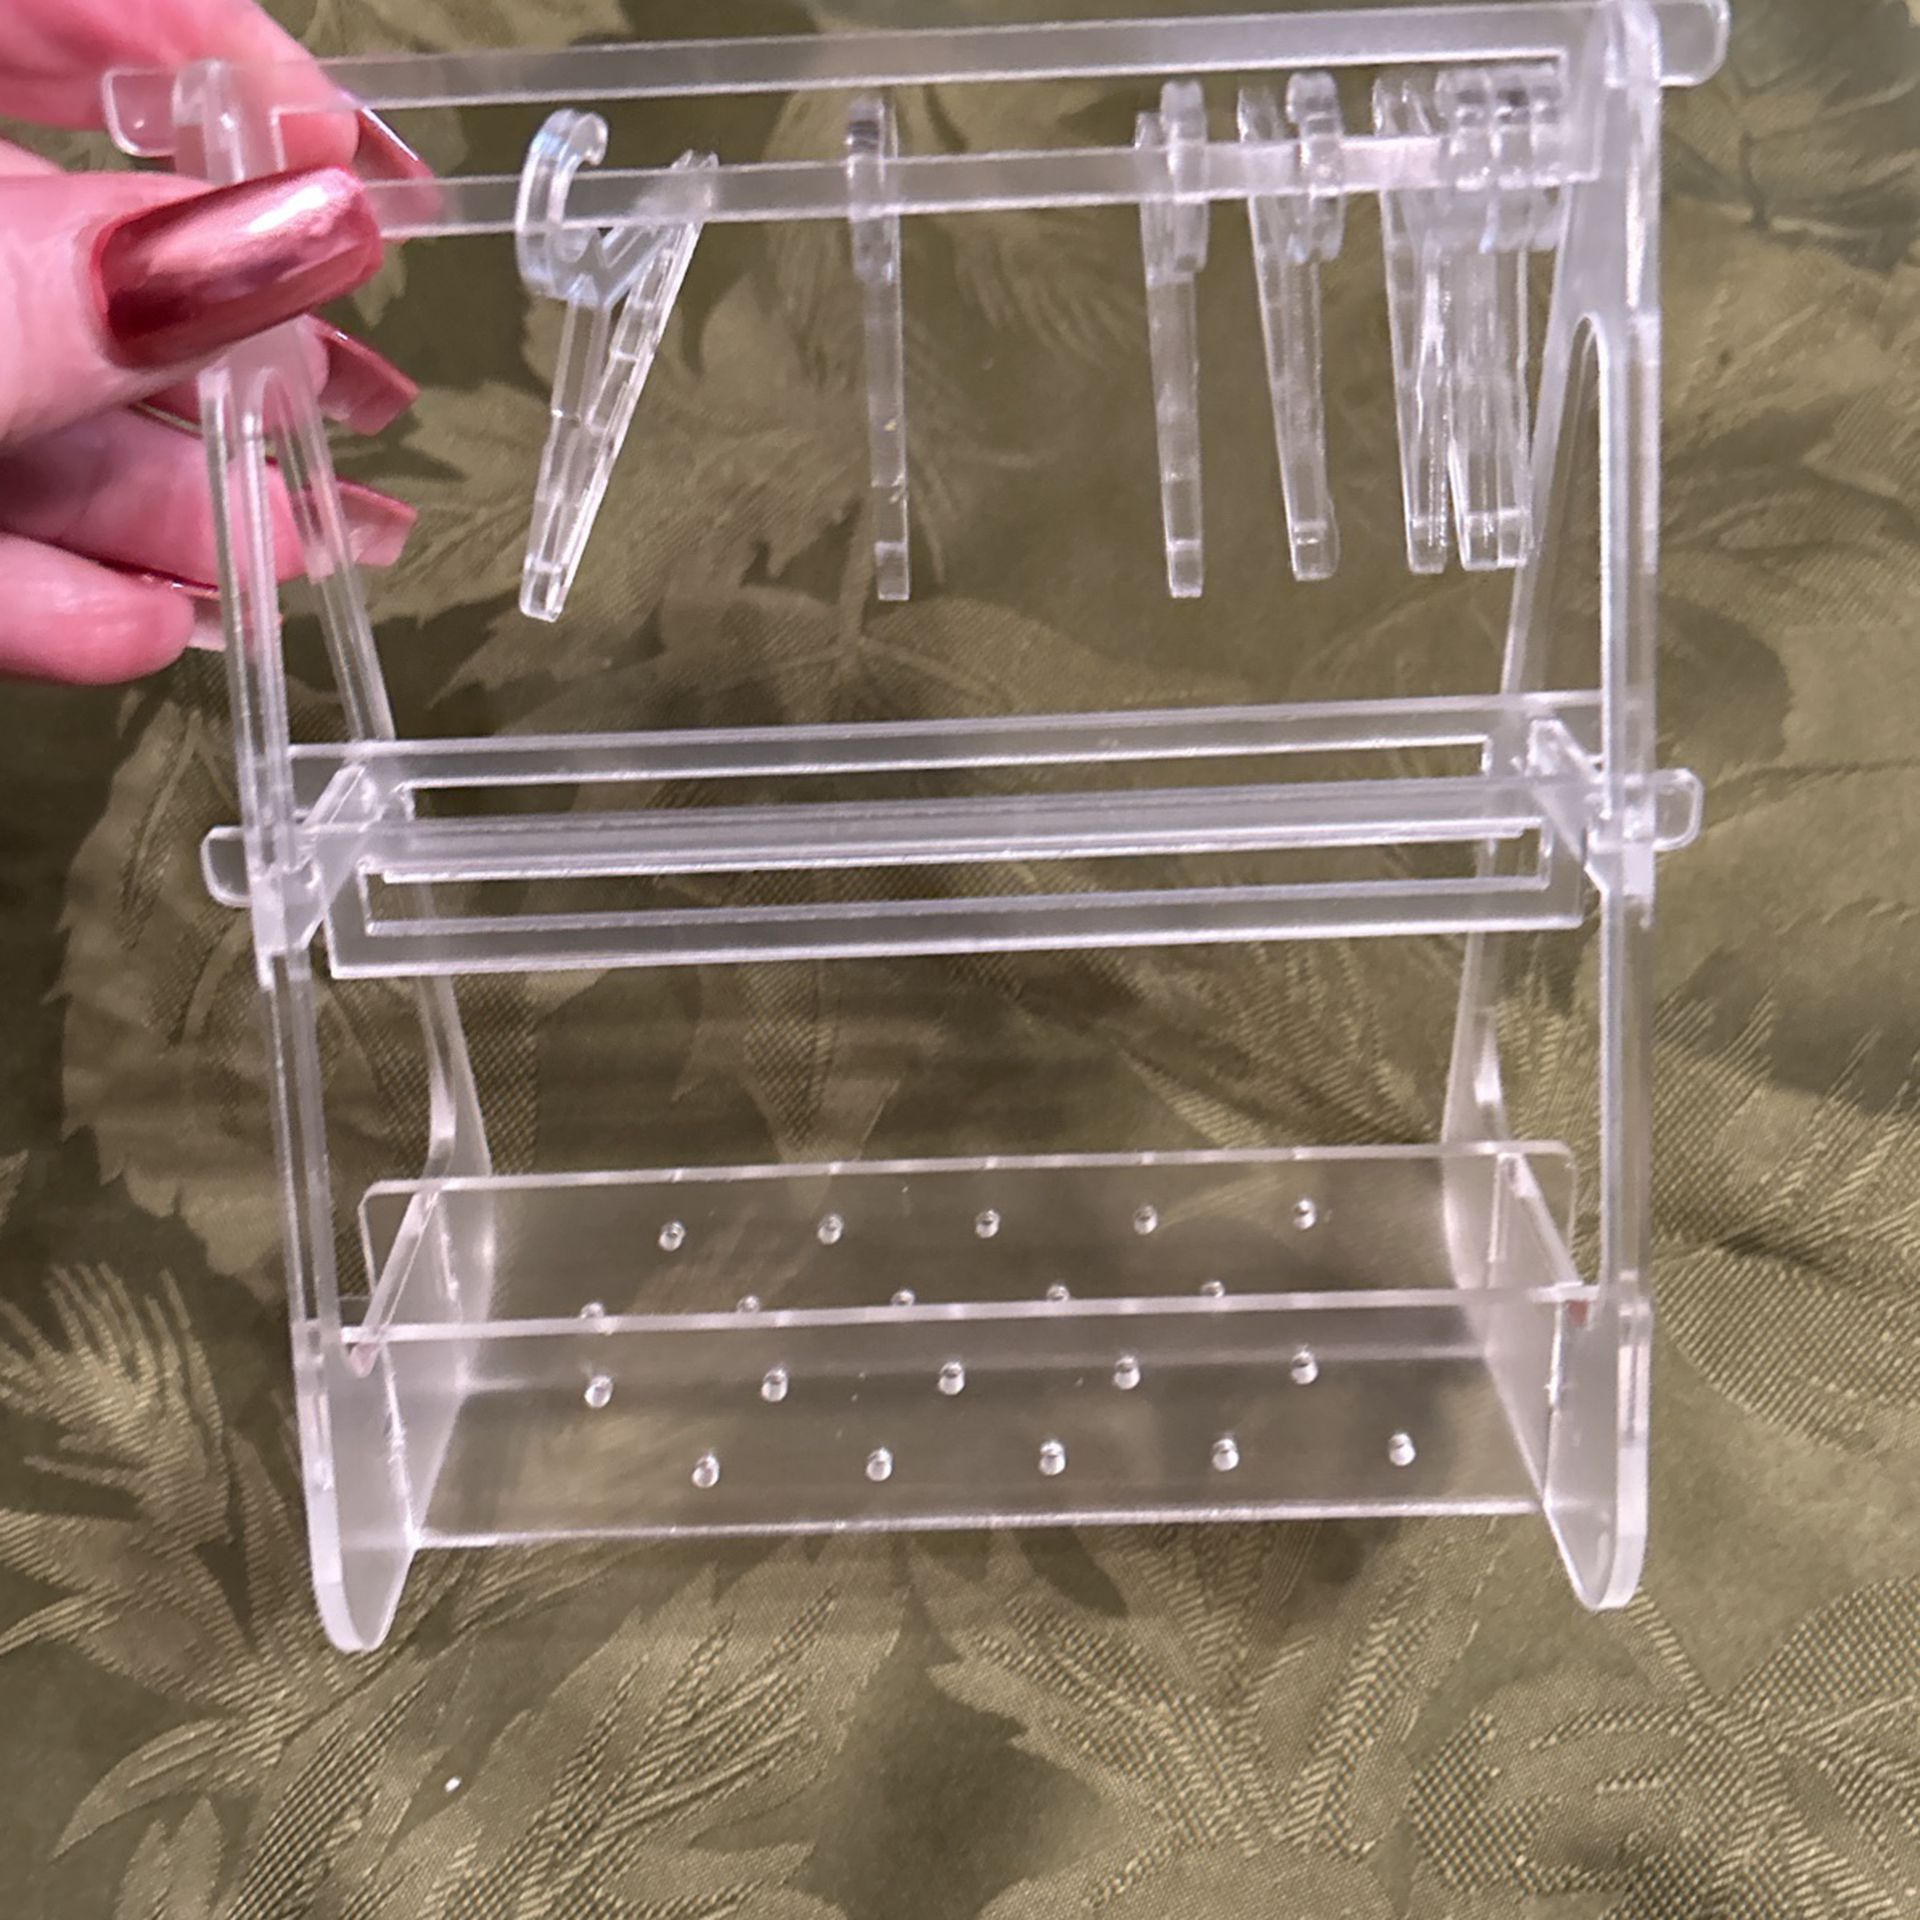 Acrylic Jewelry Holder, +3 Pairs Of Earrings Included